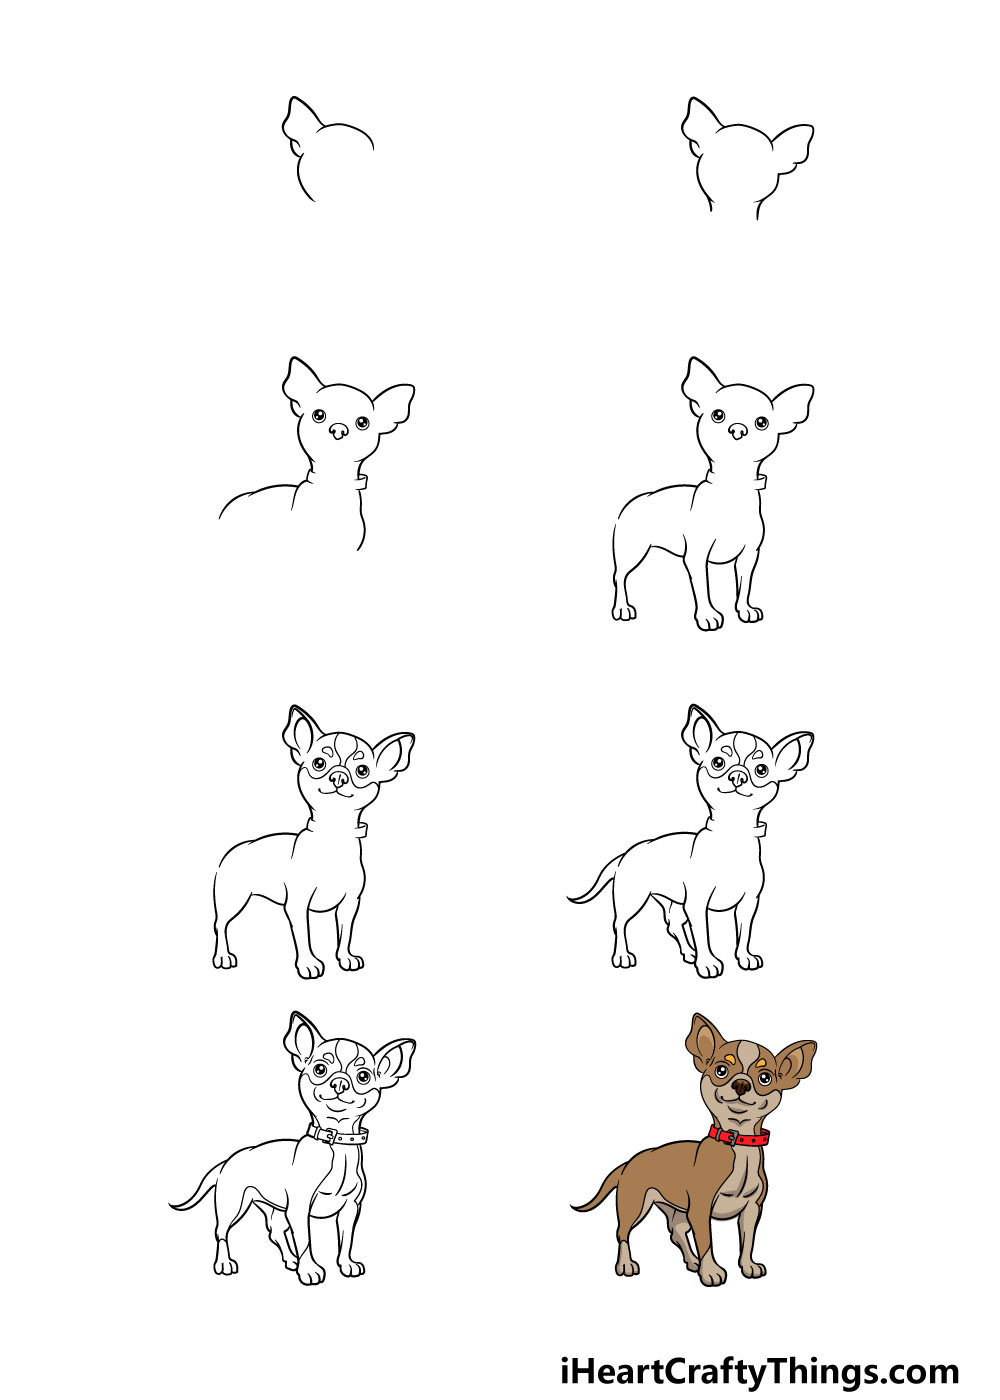 how to draw a chihuahua in 8 steps